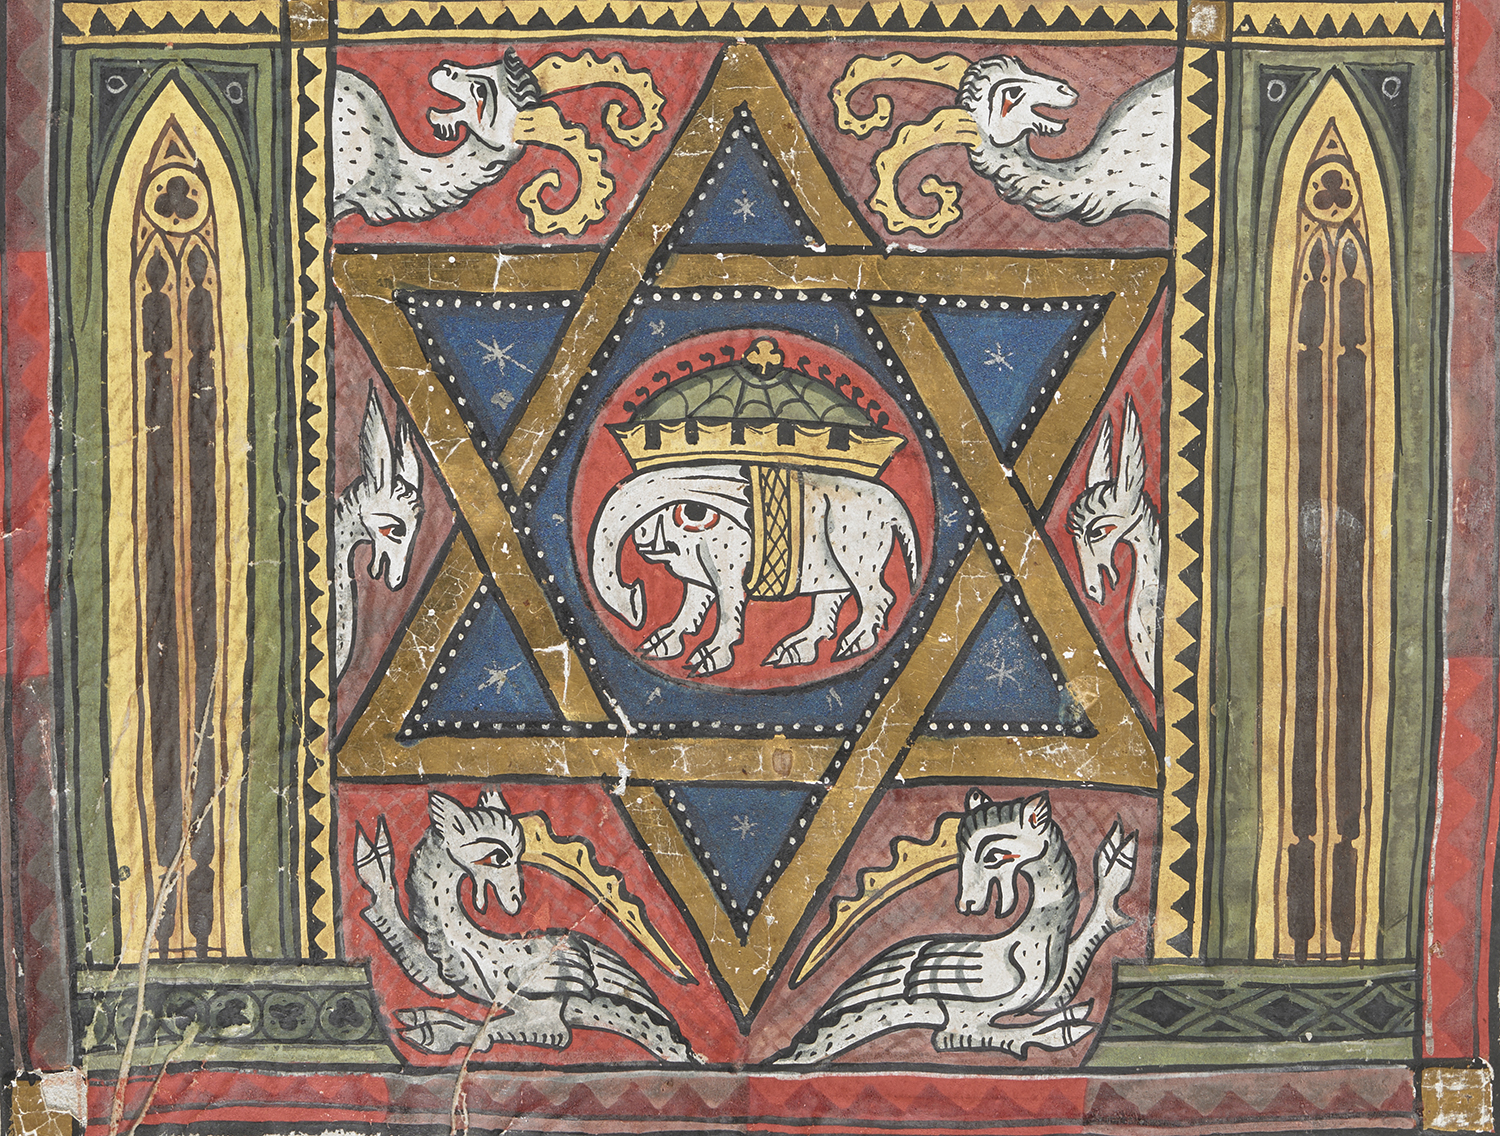 British Library Hebrew Manuscripts – now available online!